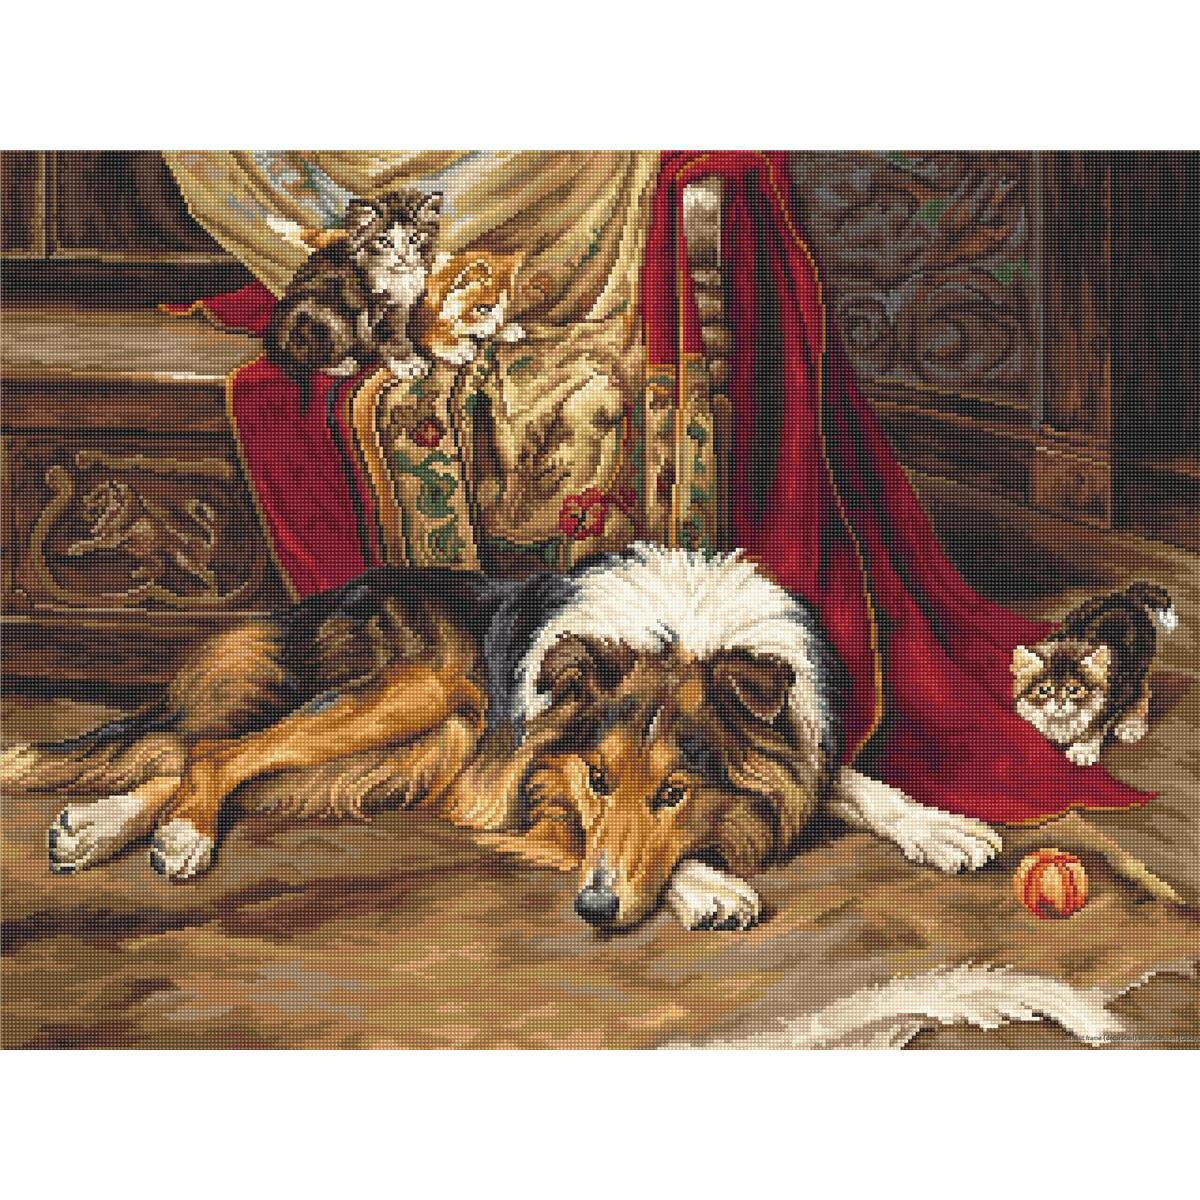 Luca-S counted Cross Stitch kit "A Reluctant...